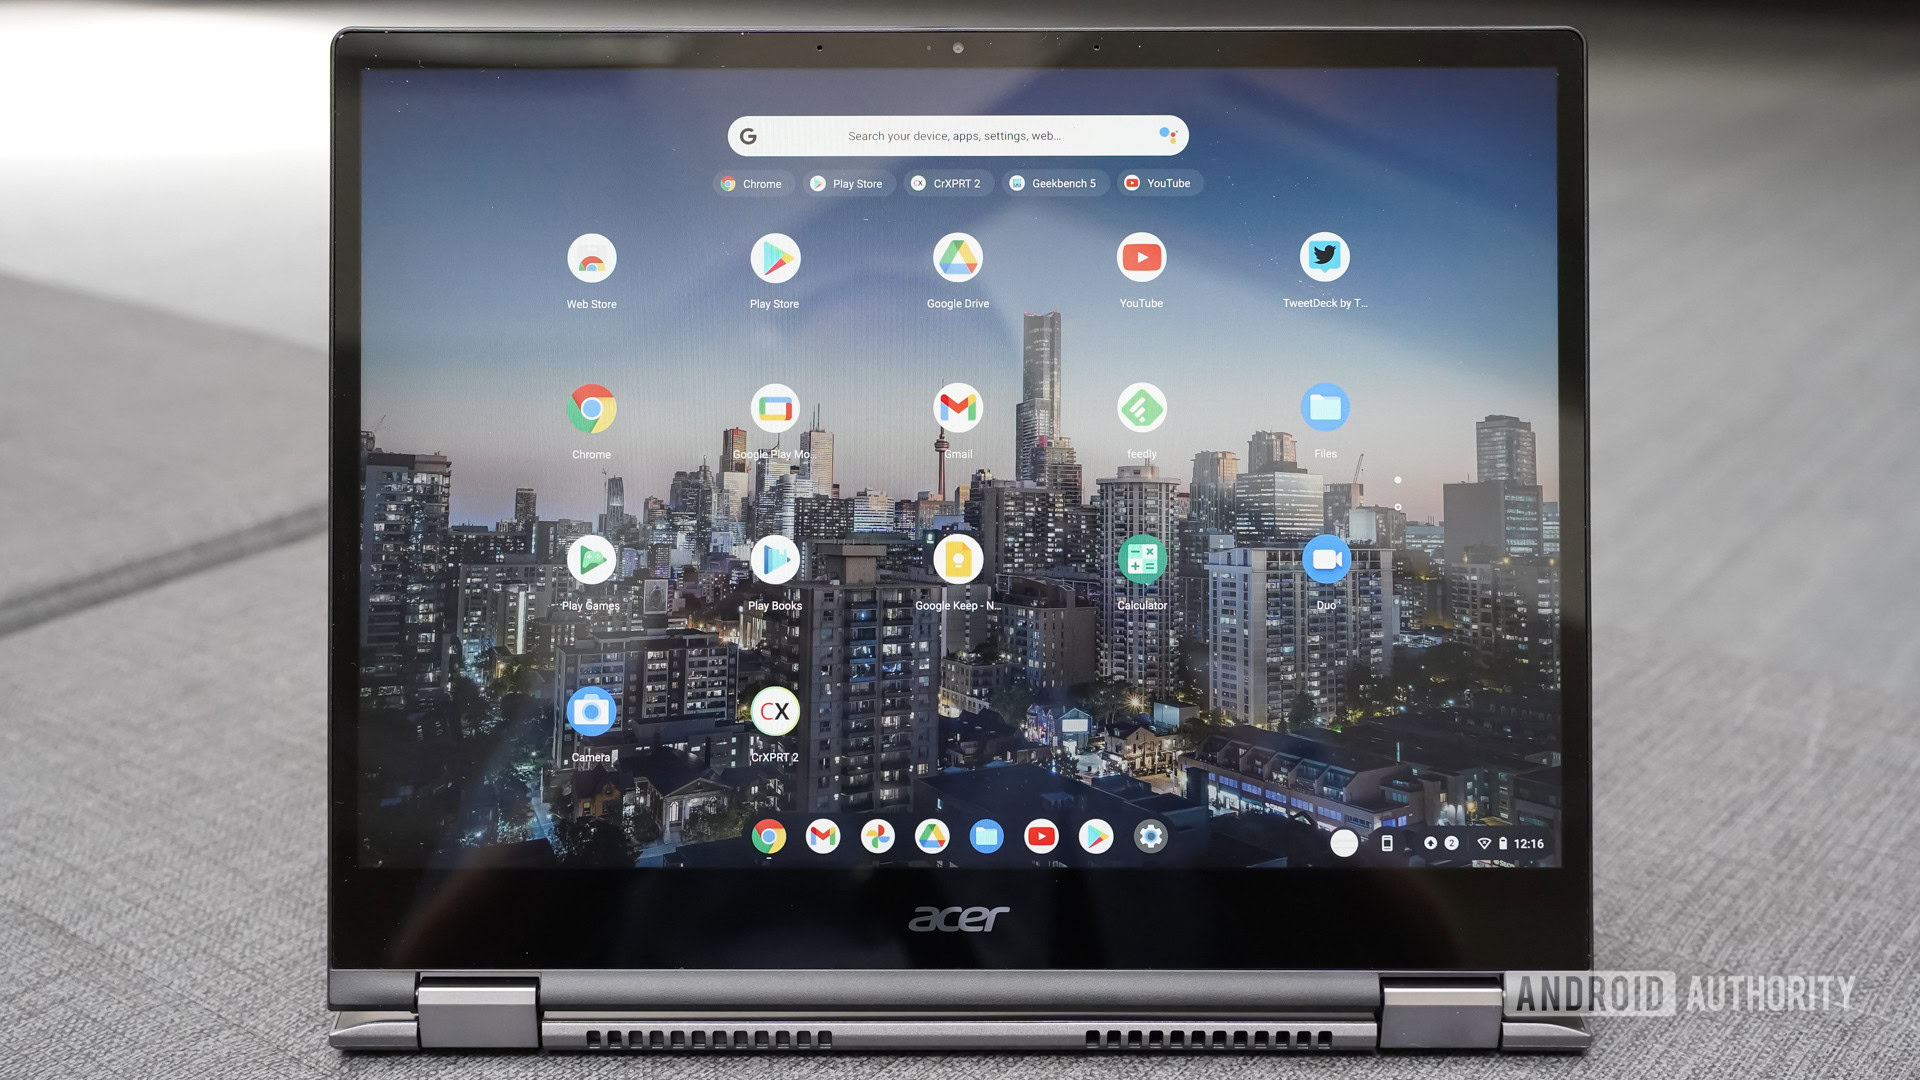 The Acer Chromebook Spin 713 display showing apps.